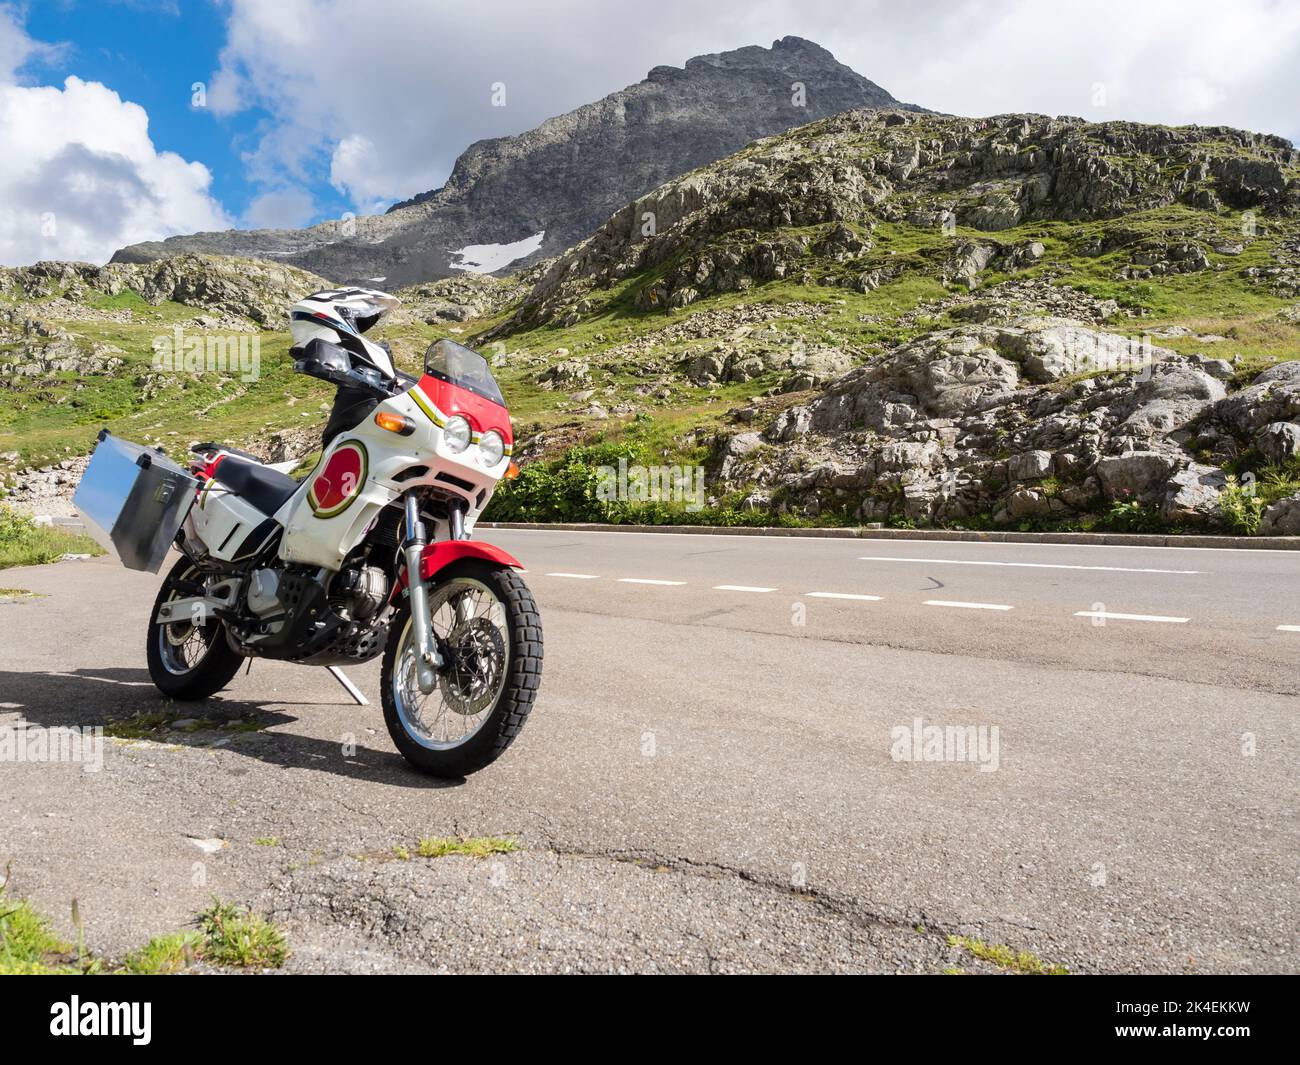 An adventure motorcycle at a mountain pass in the Swiss alps. Stock Photo